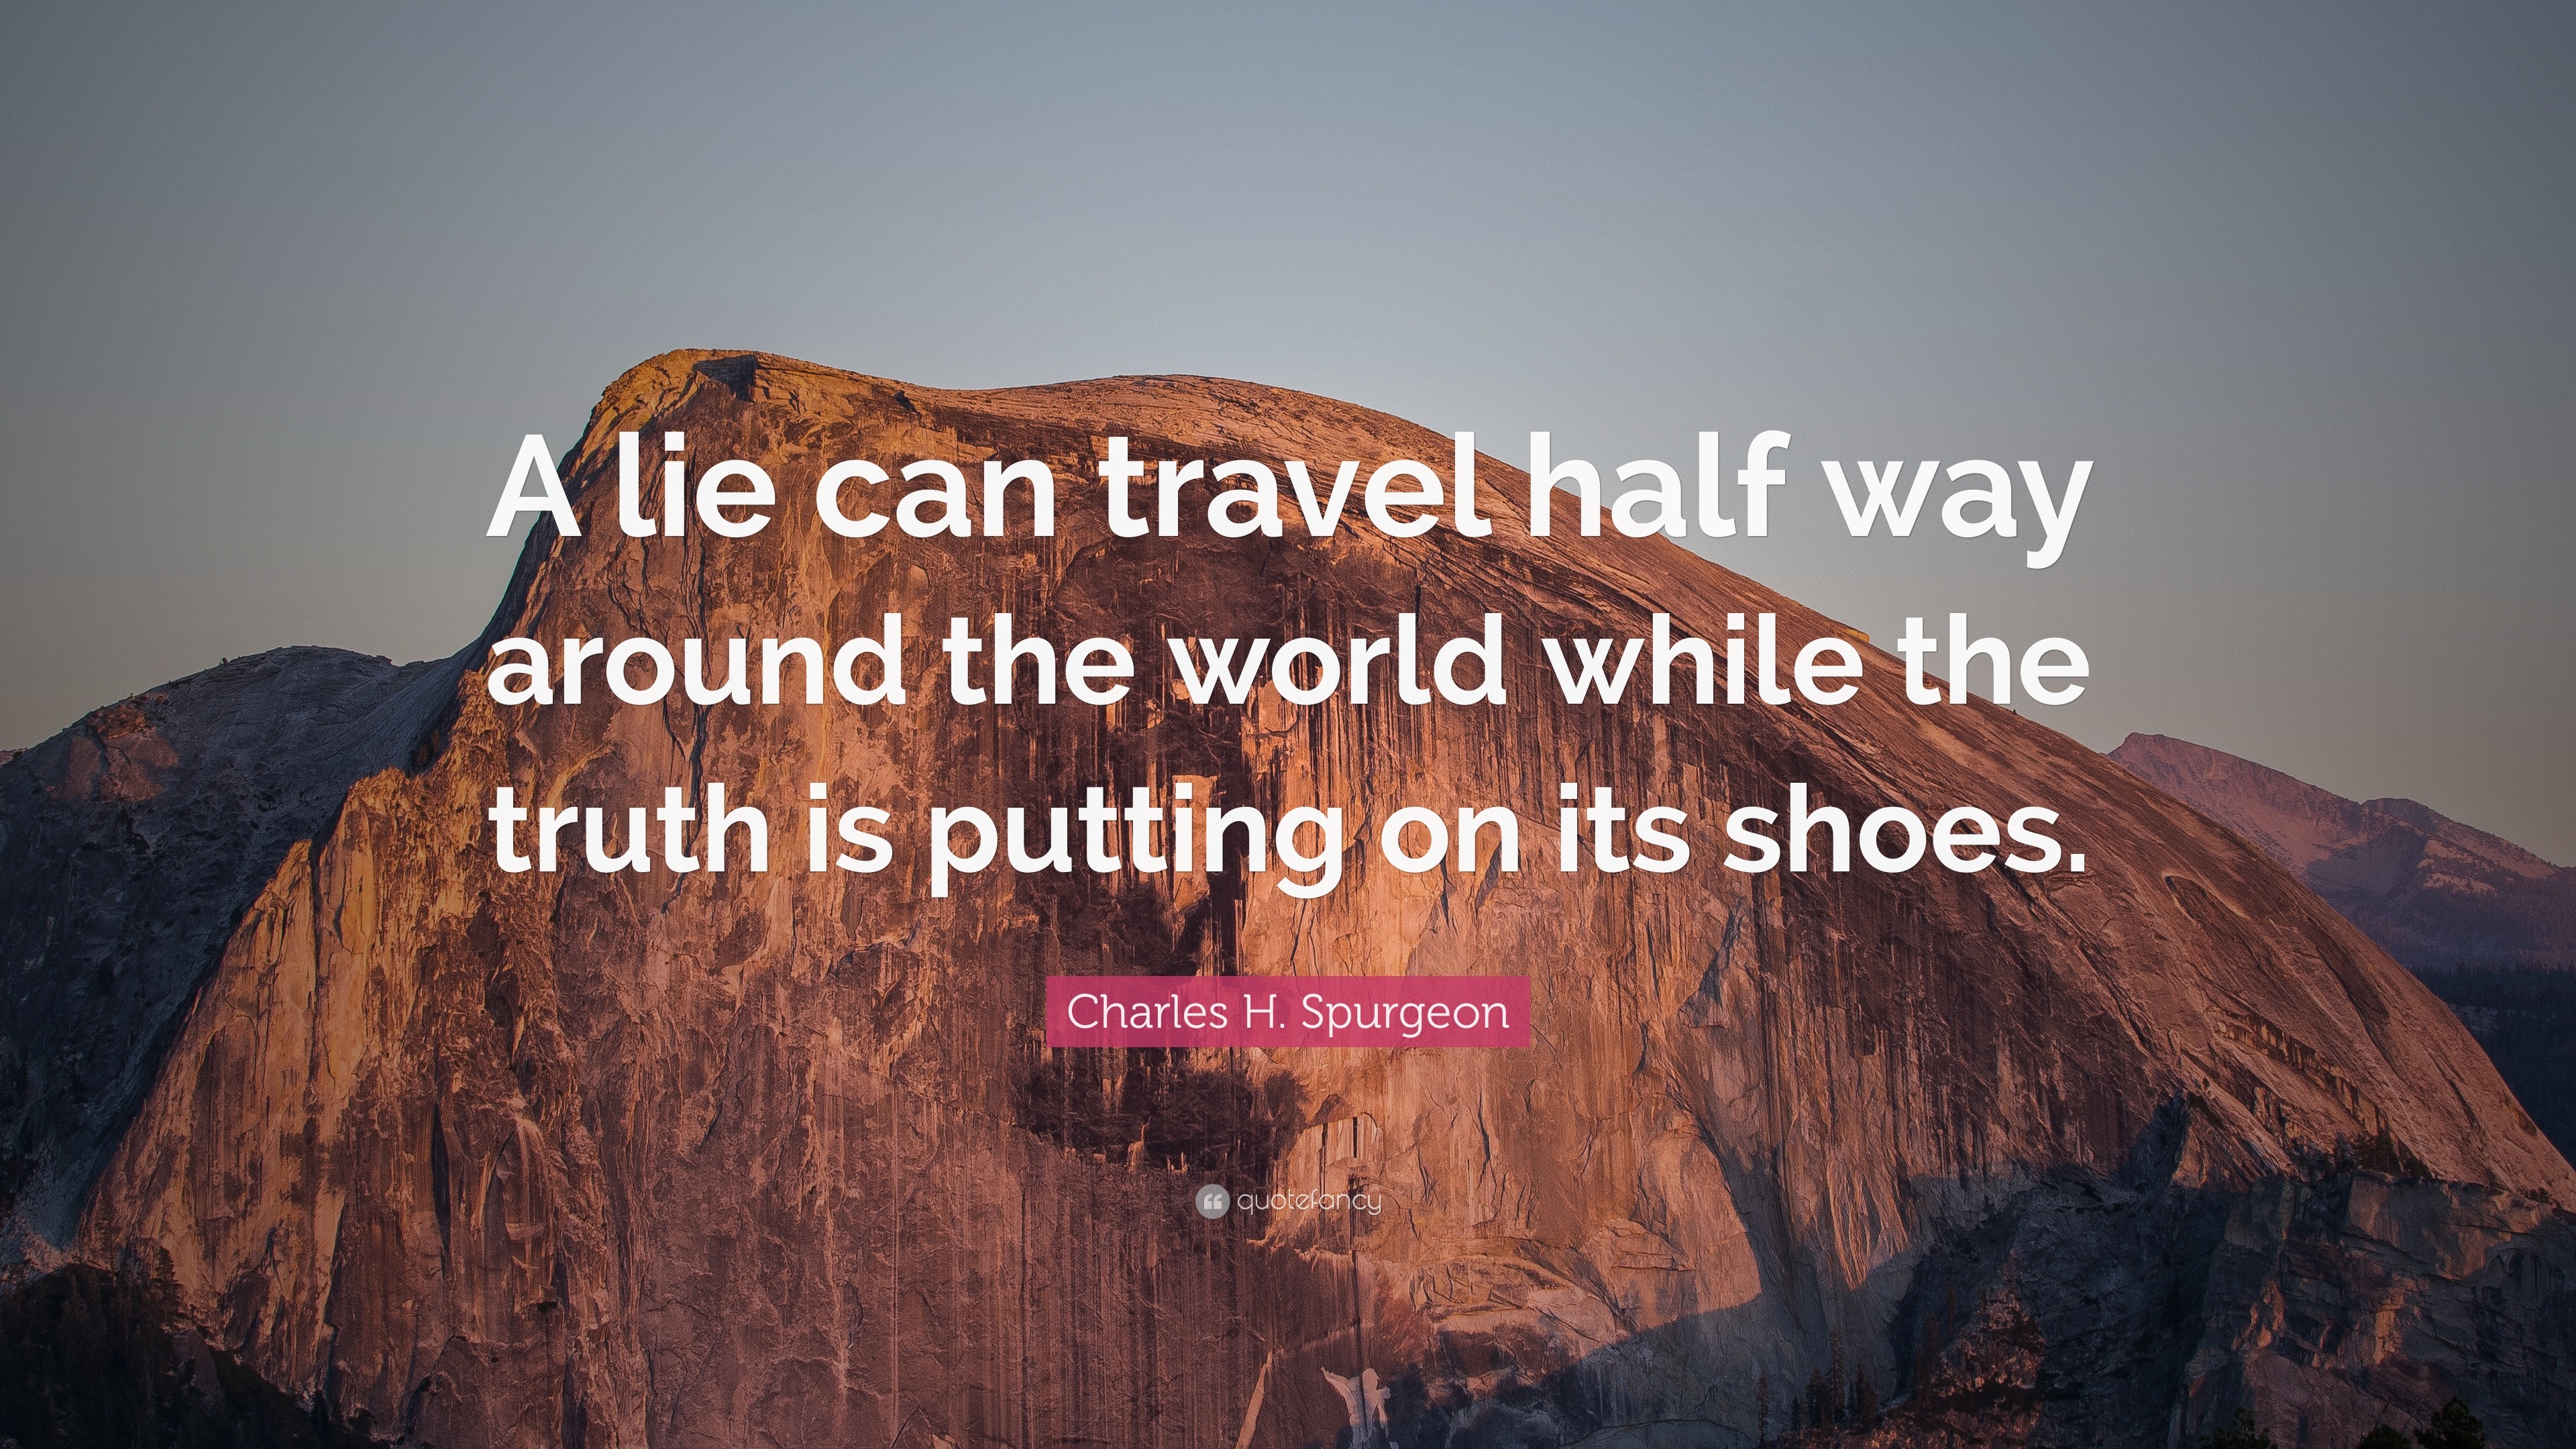 Charles H. Spurgeon Quote “A lie can travel half way